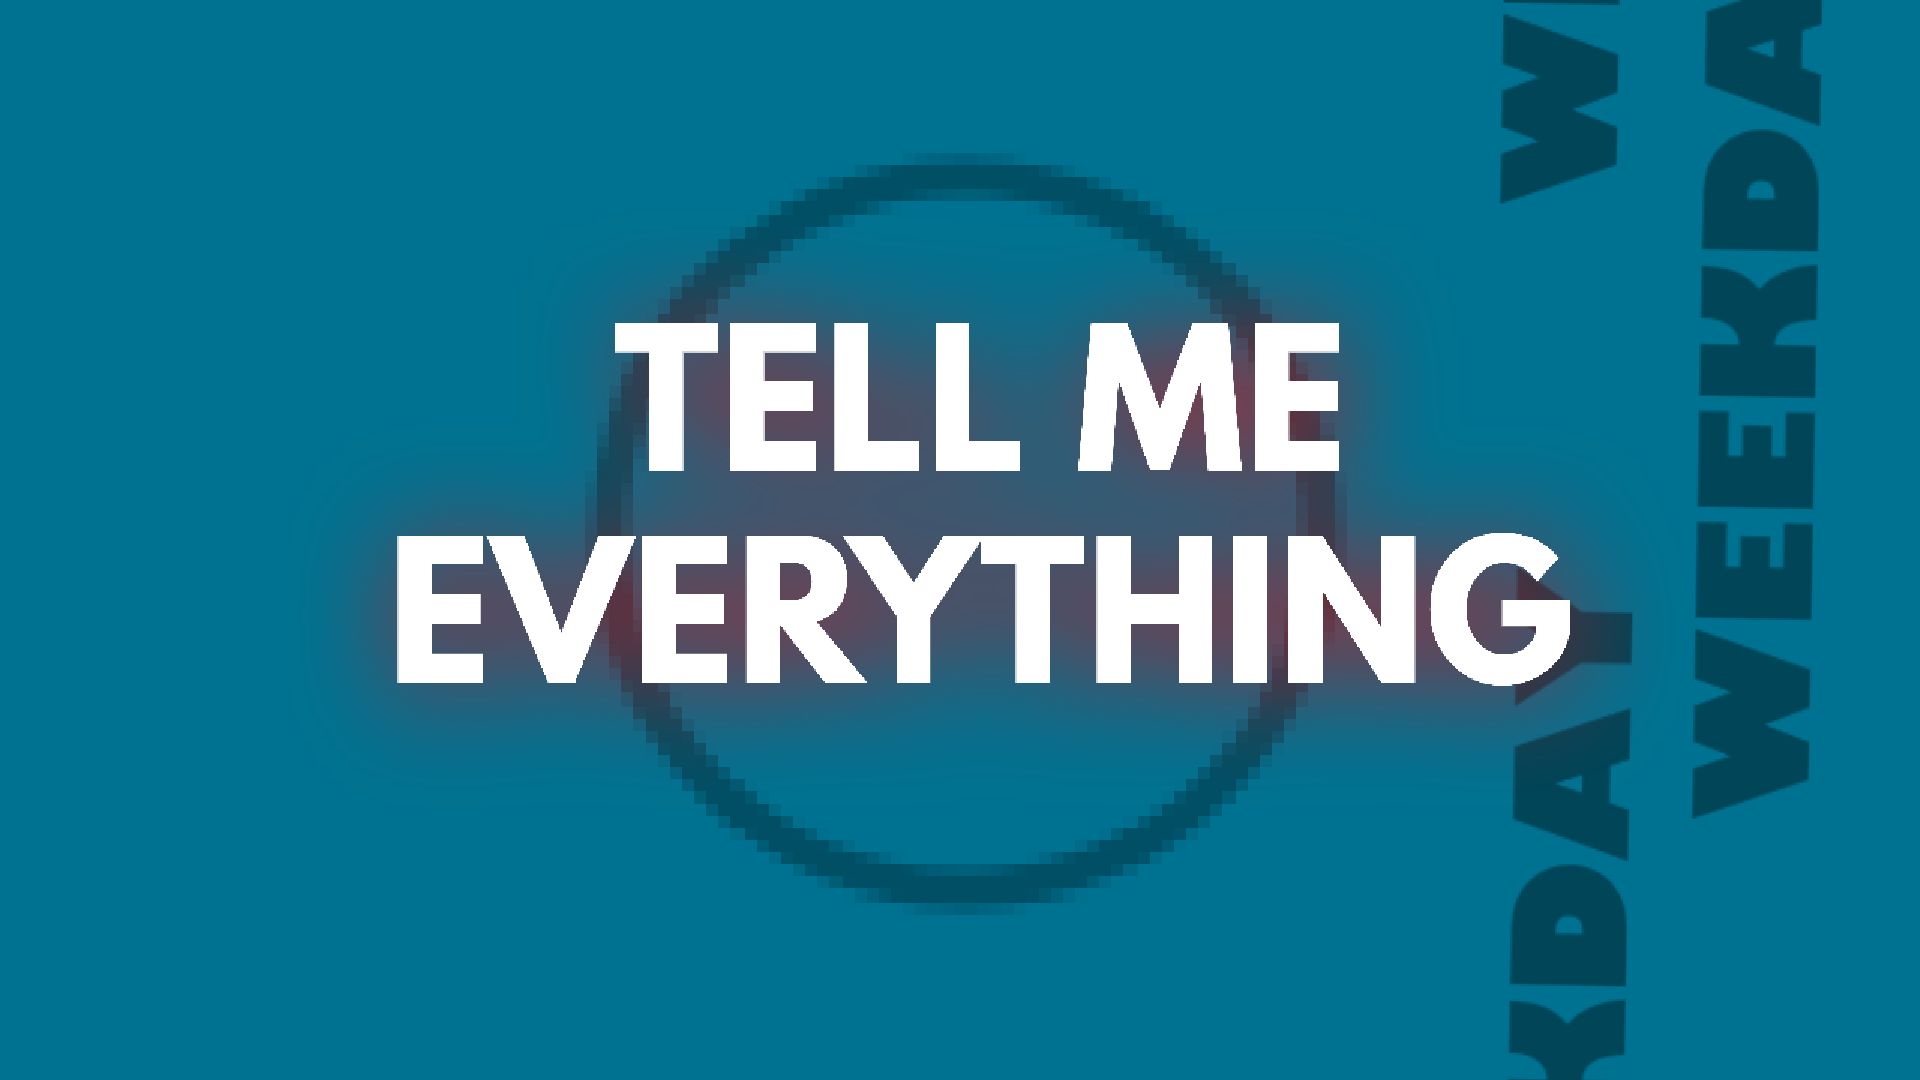 TELL ME EVERYTHING